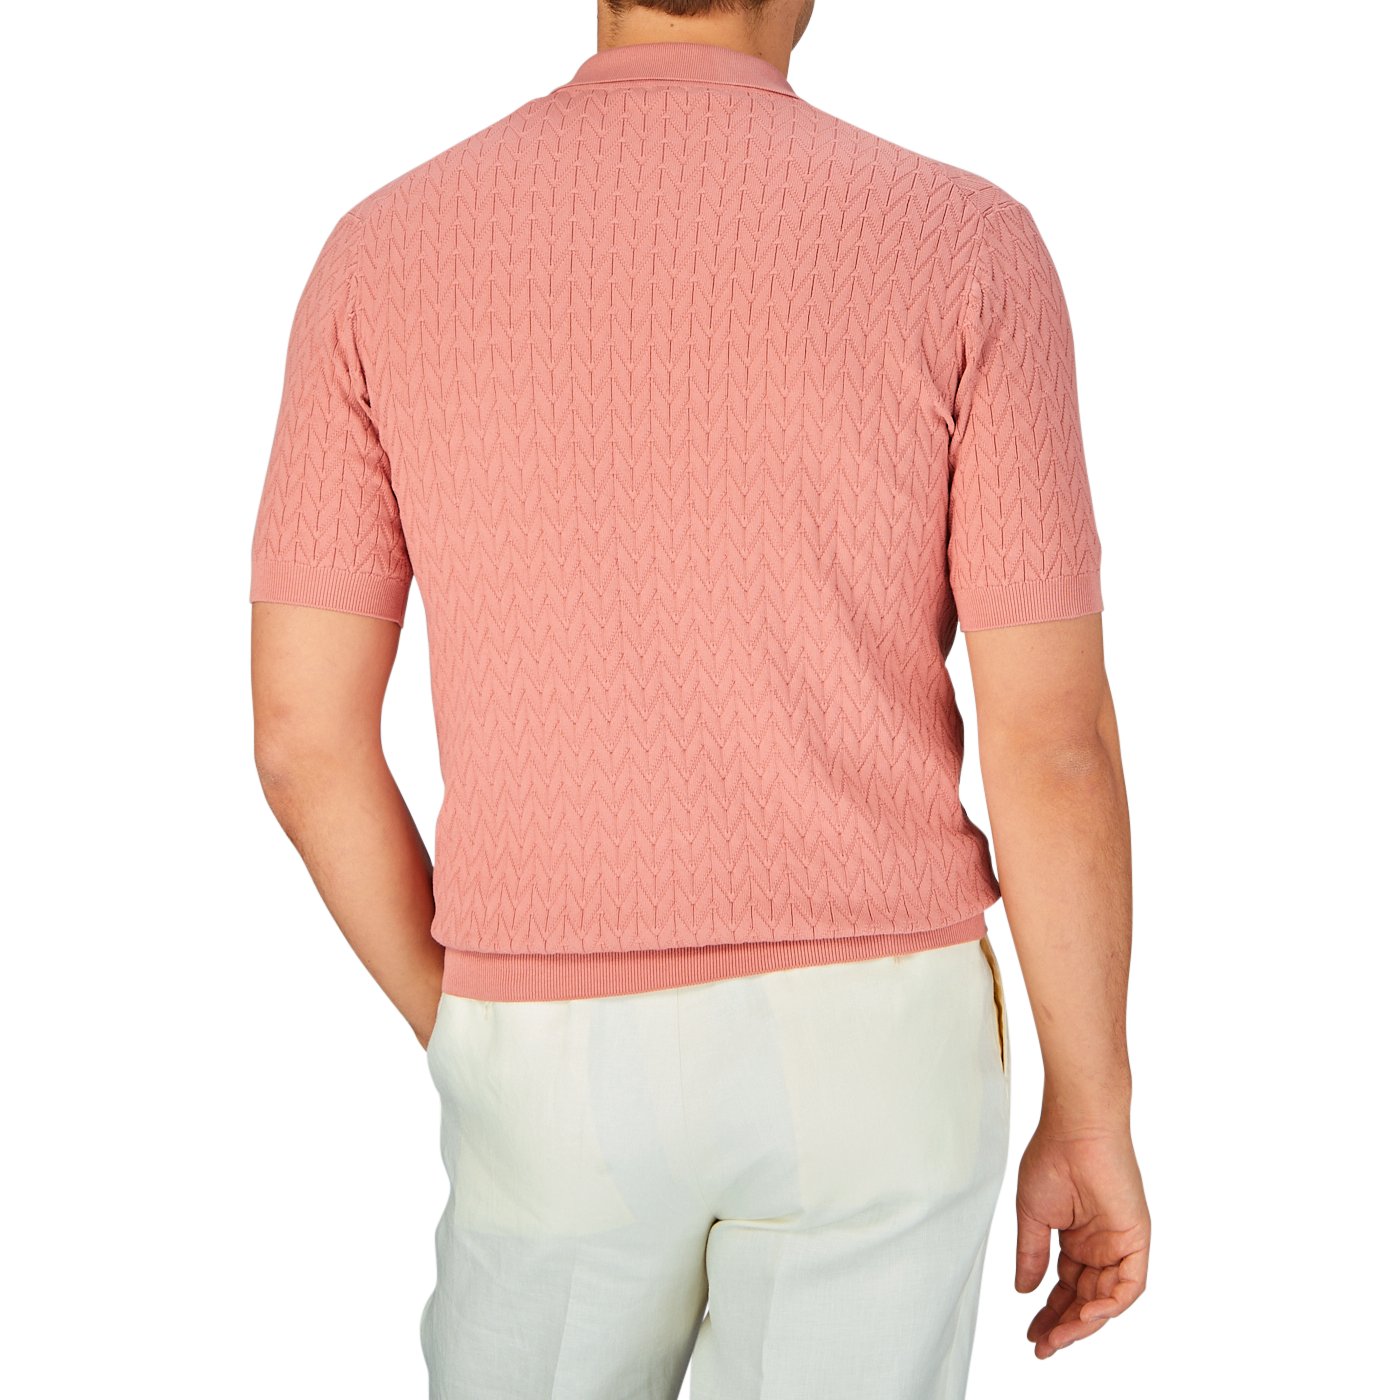 A man standing with his back to the camera wearing a Muted Pink Cotton Capri Collar Polo Shirt by Altea and white pants.